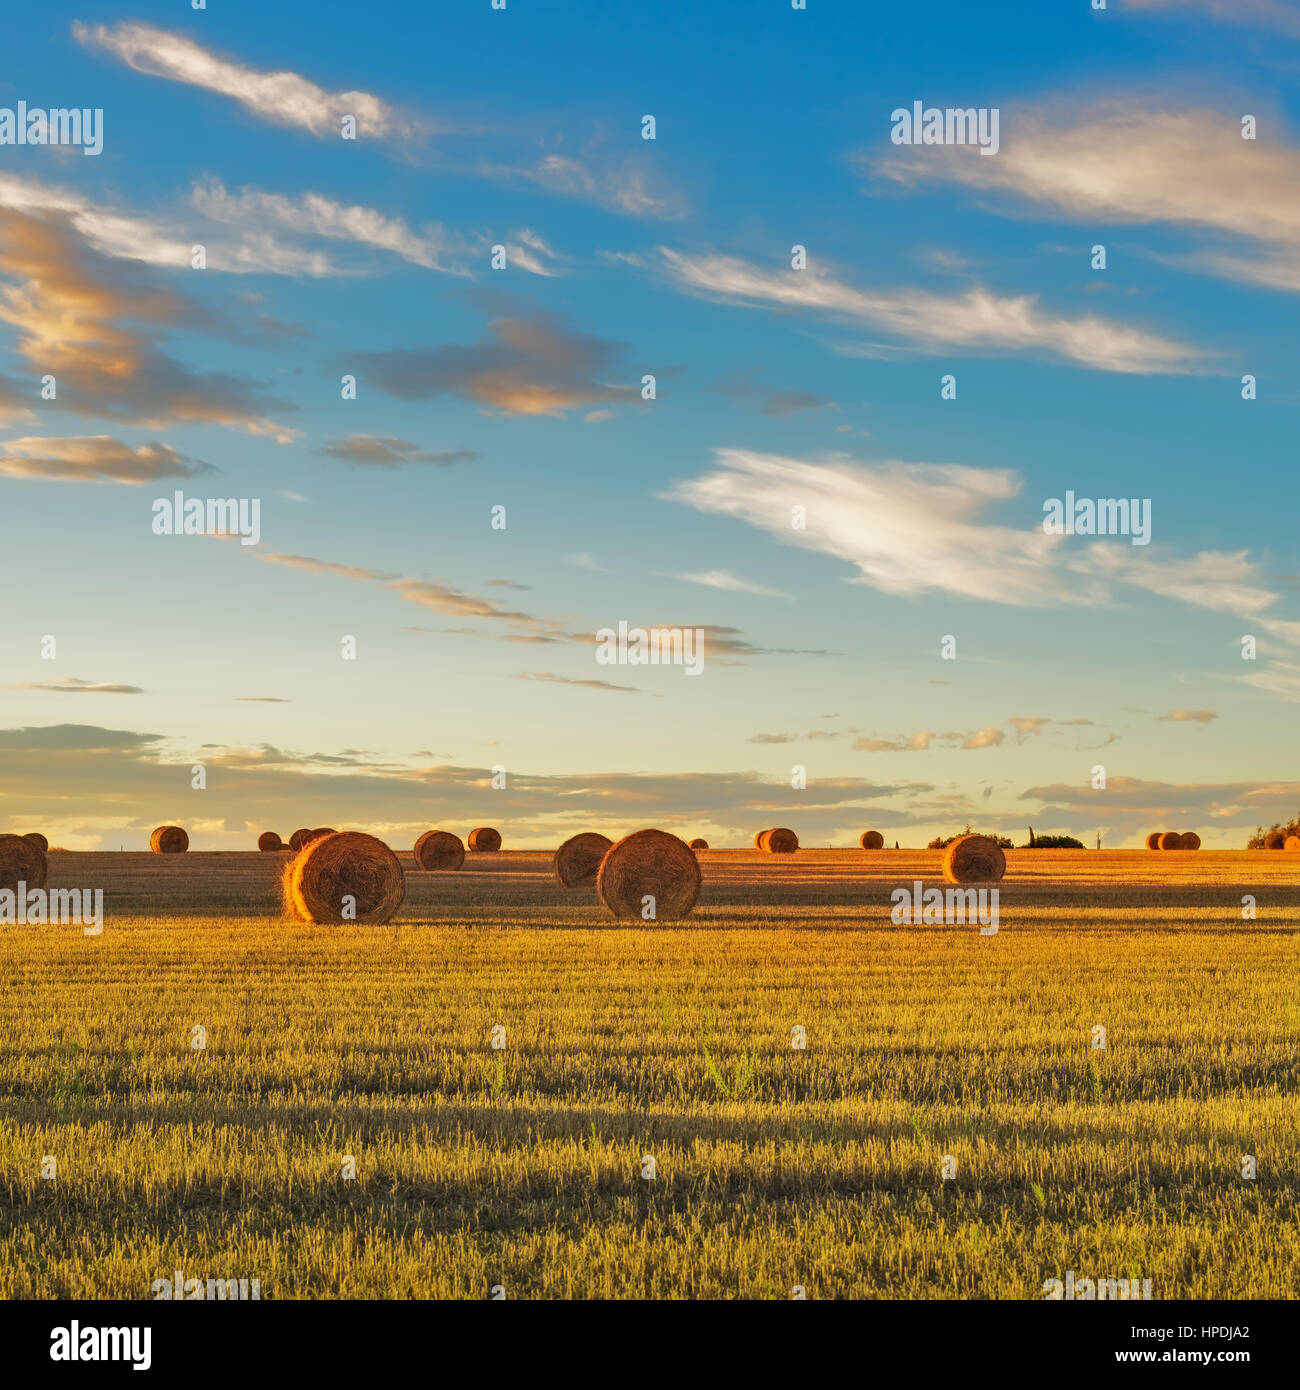 Hay rolls and harvested field at sunset. Tuscany, Italy Stock Photo